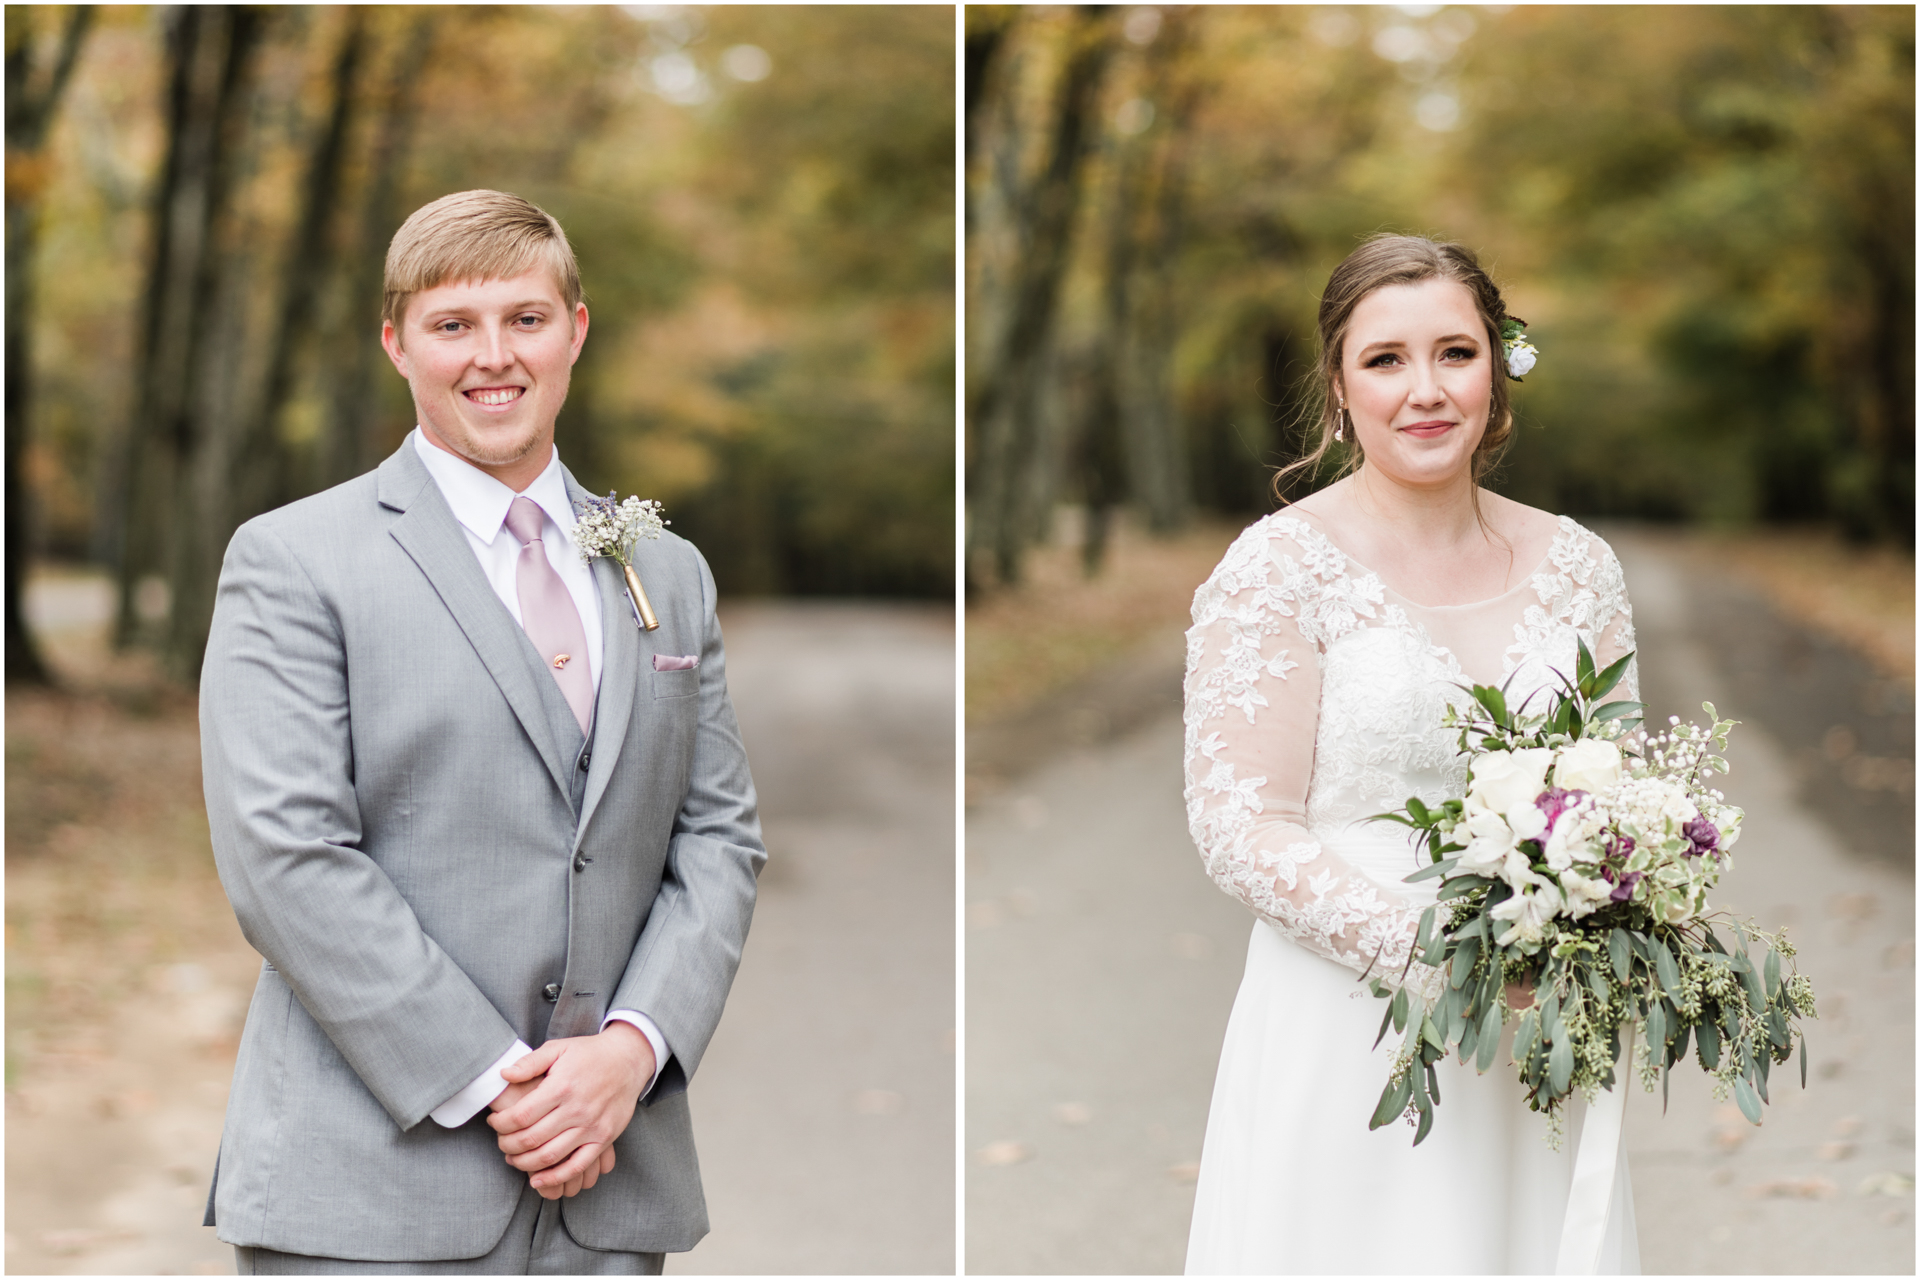 Bride and Groom Individual Portraits surrounded by Autumn Colored Trees